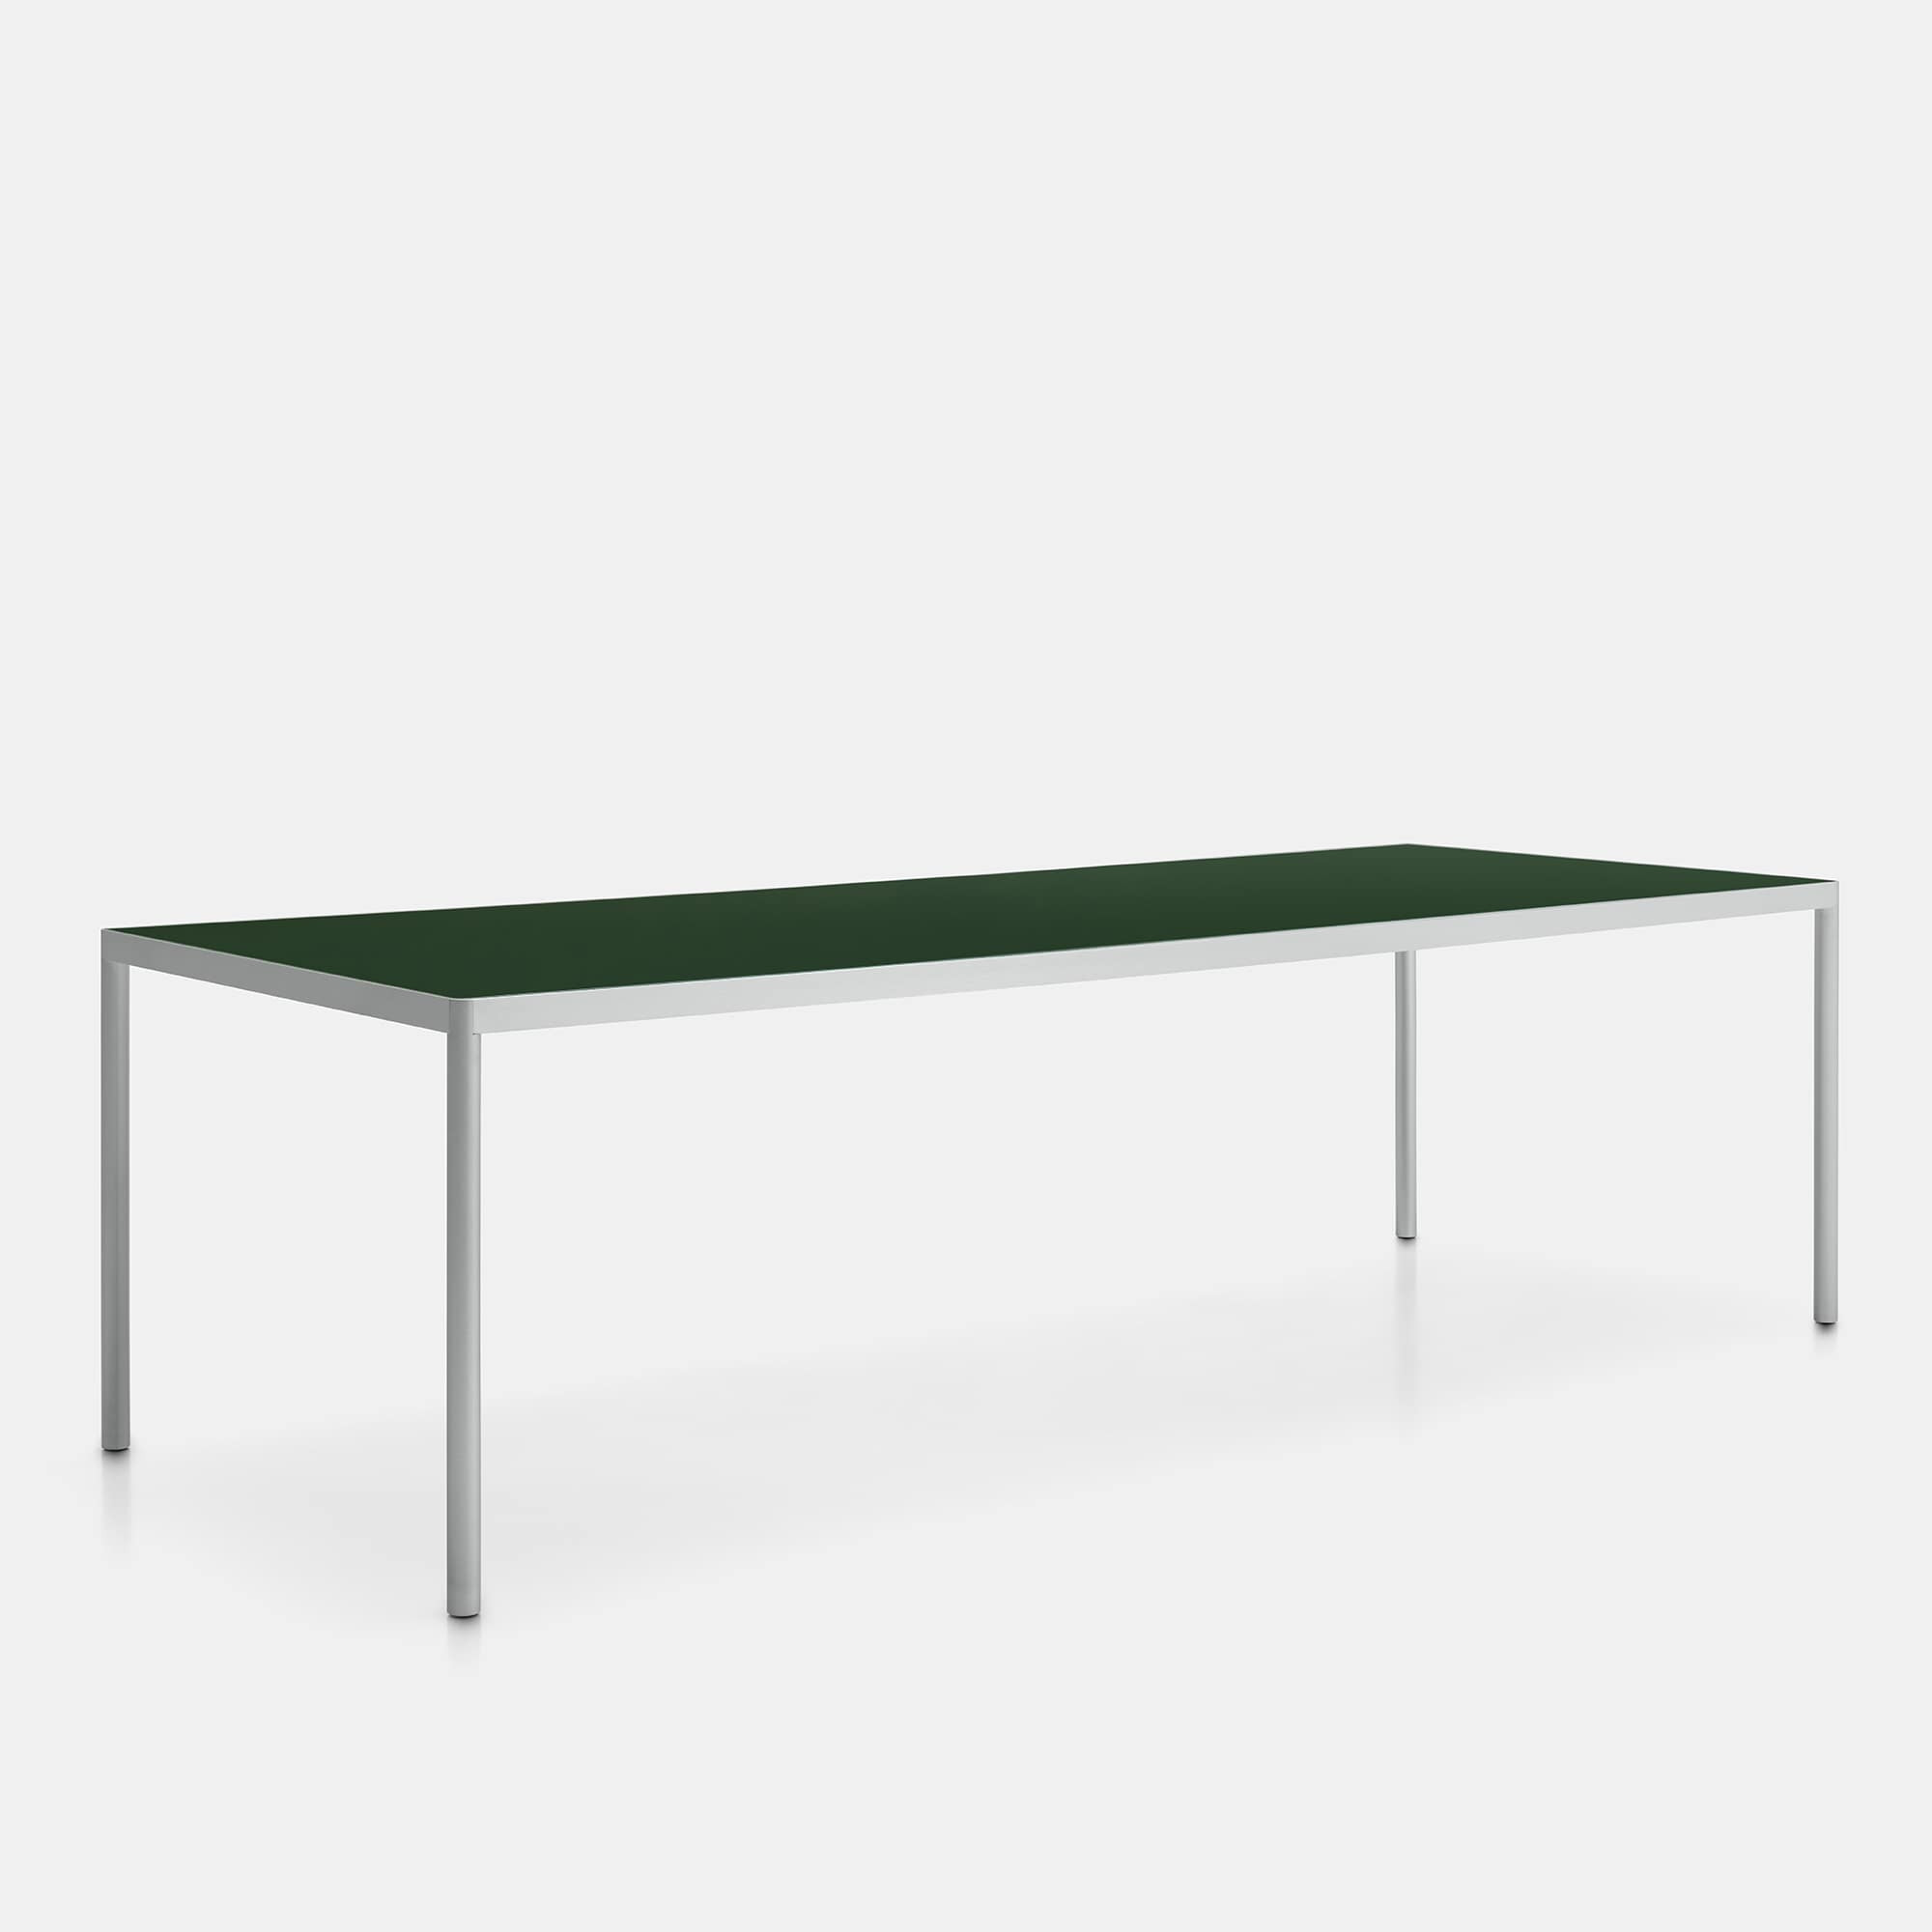 Offset Indoor / Outdoor Table ☞ Use: Outdoor ☞ Structure: Brushed Anodised Aluminium X137 ☞ Top: Reconstructed Stone Black Slate X132